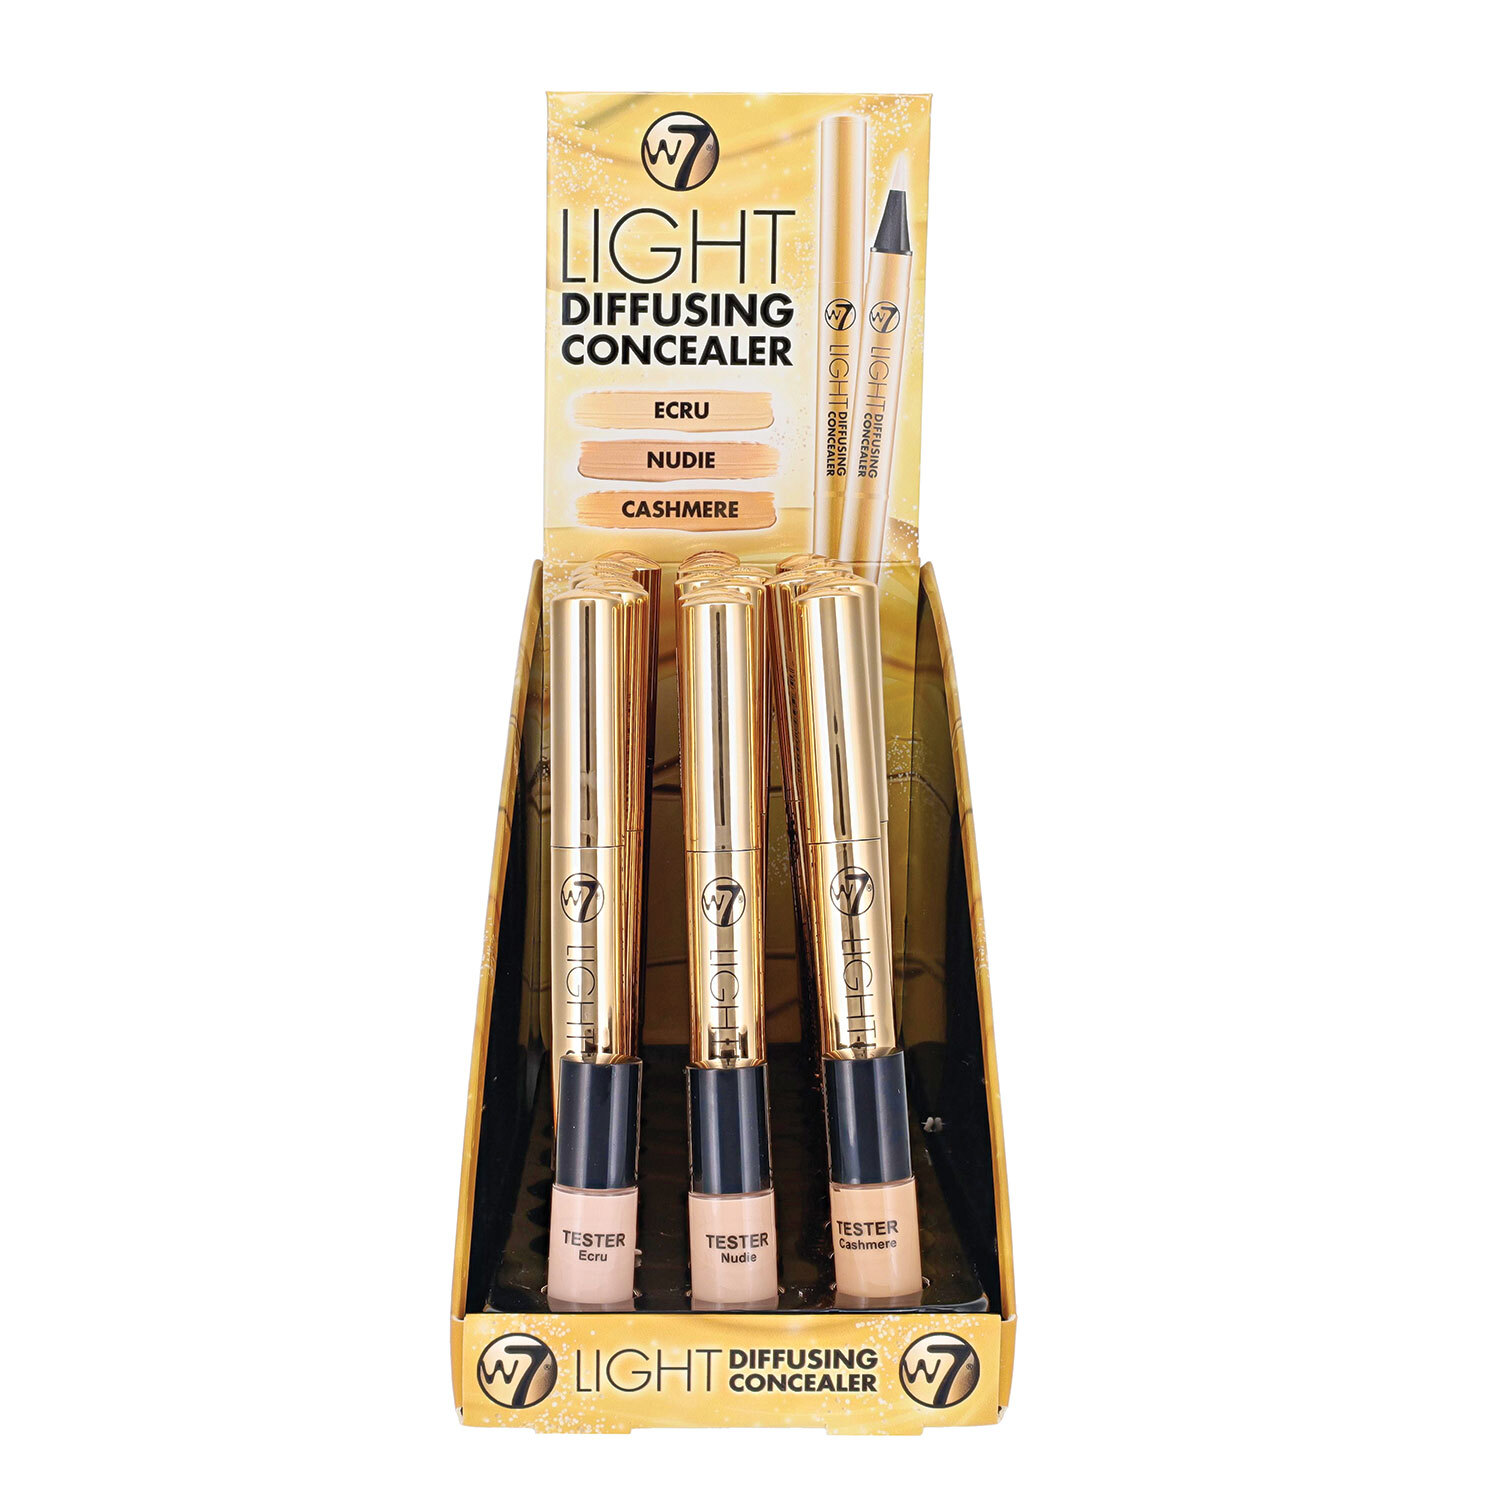 W7 Light Diffusing Concealer Image